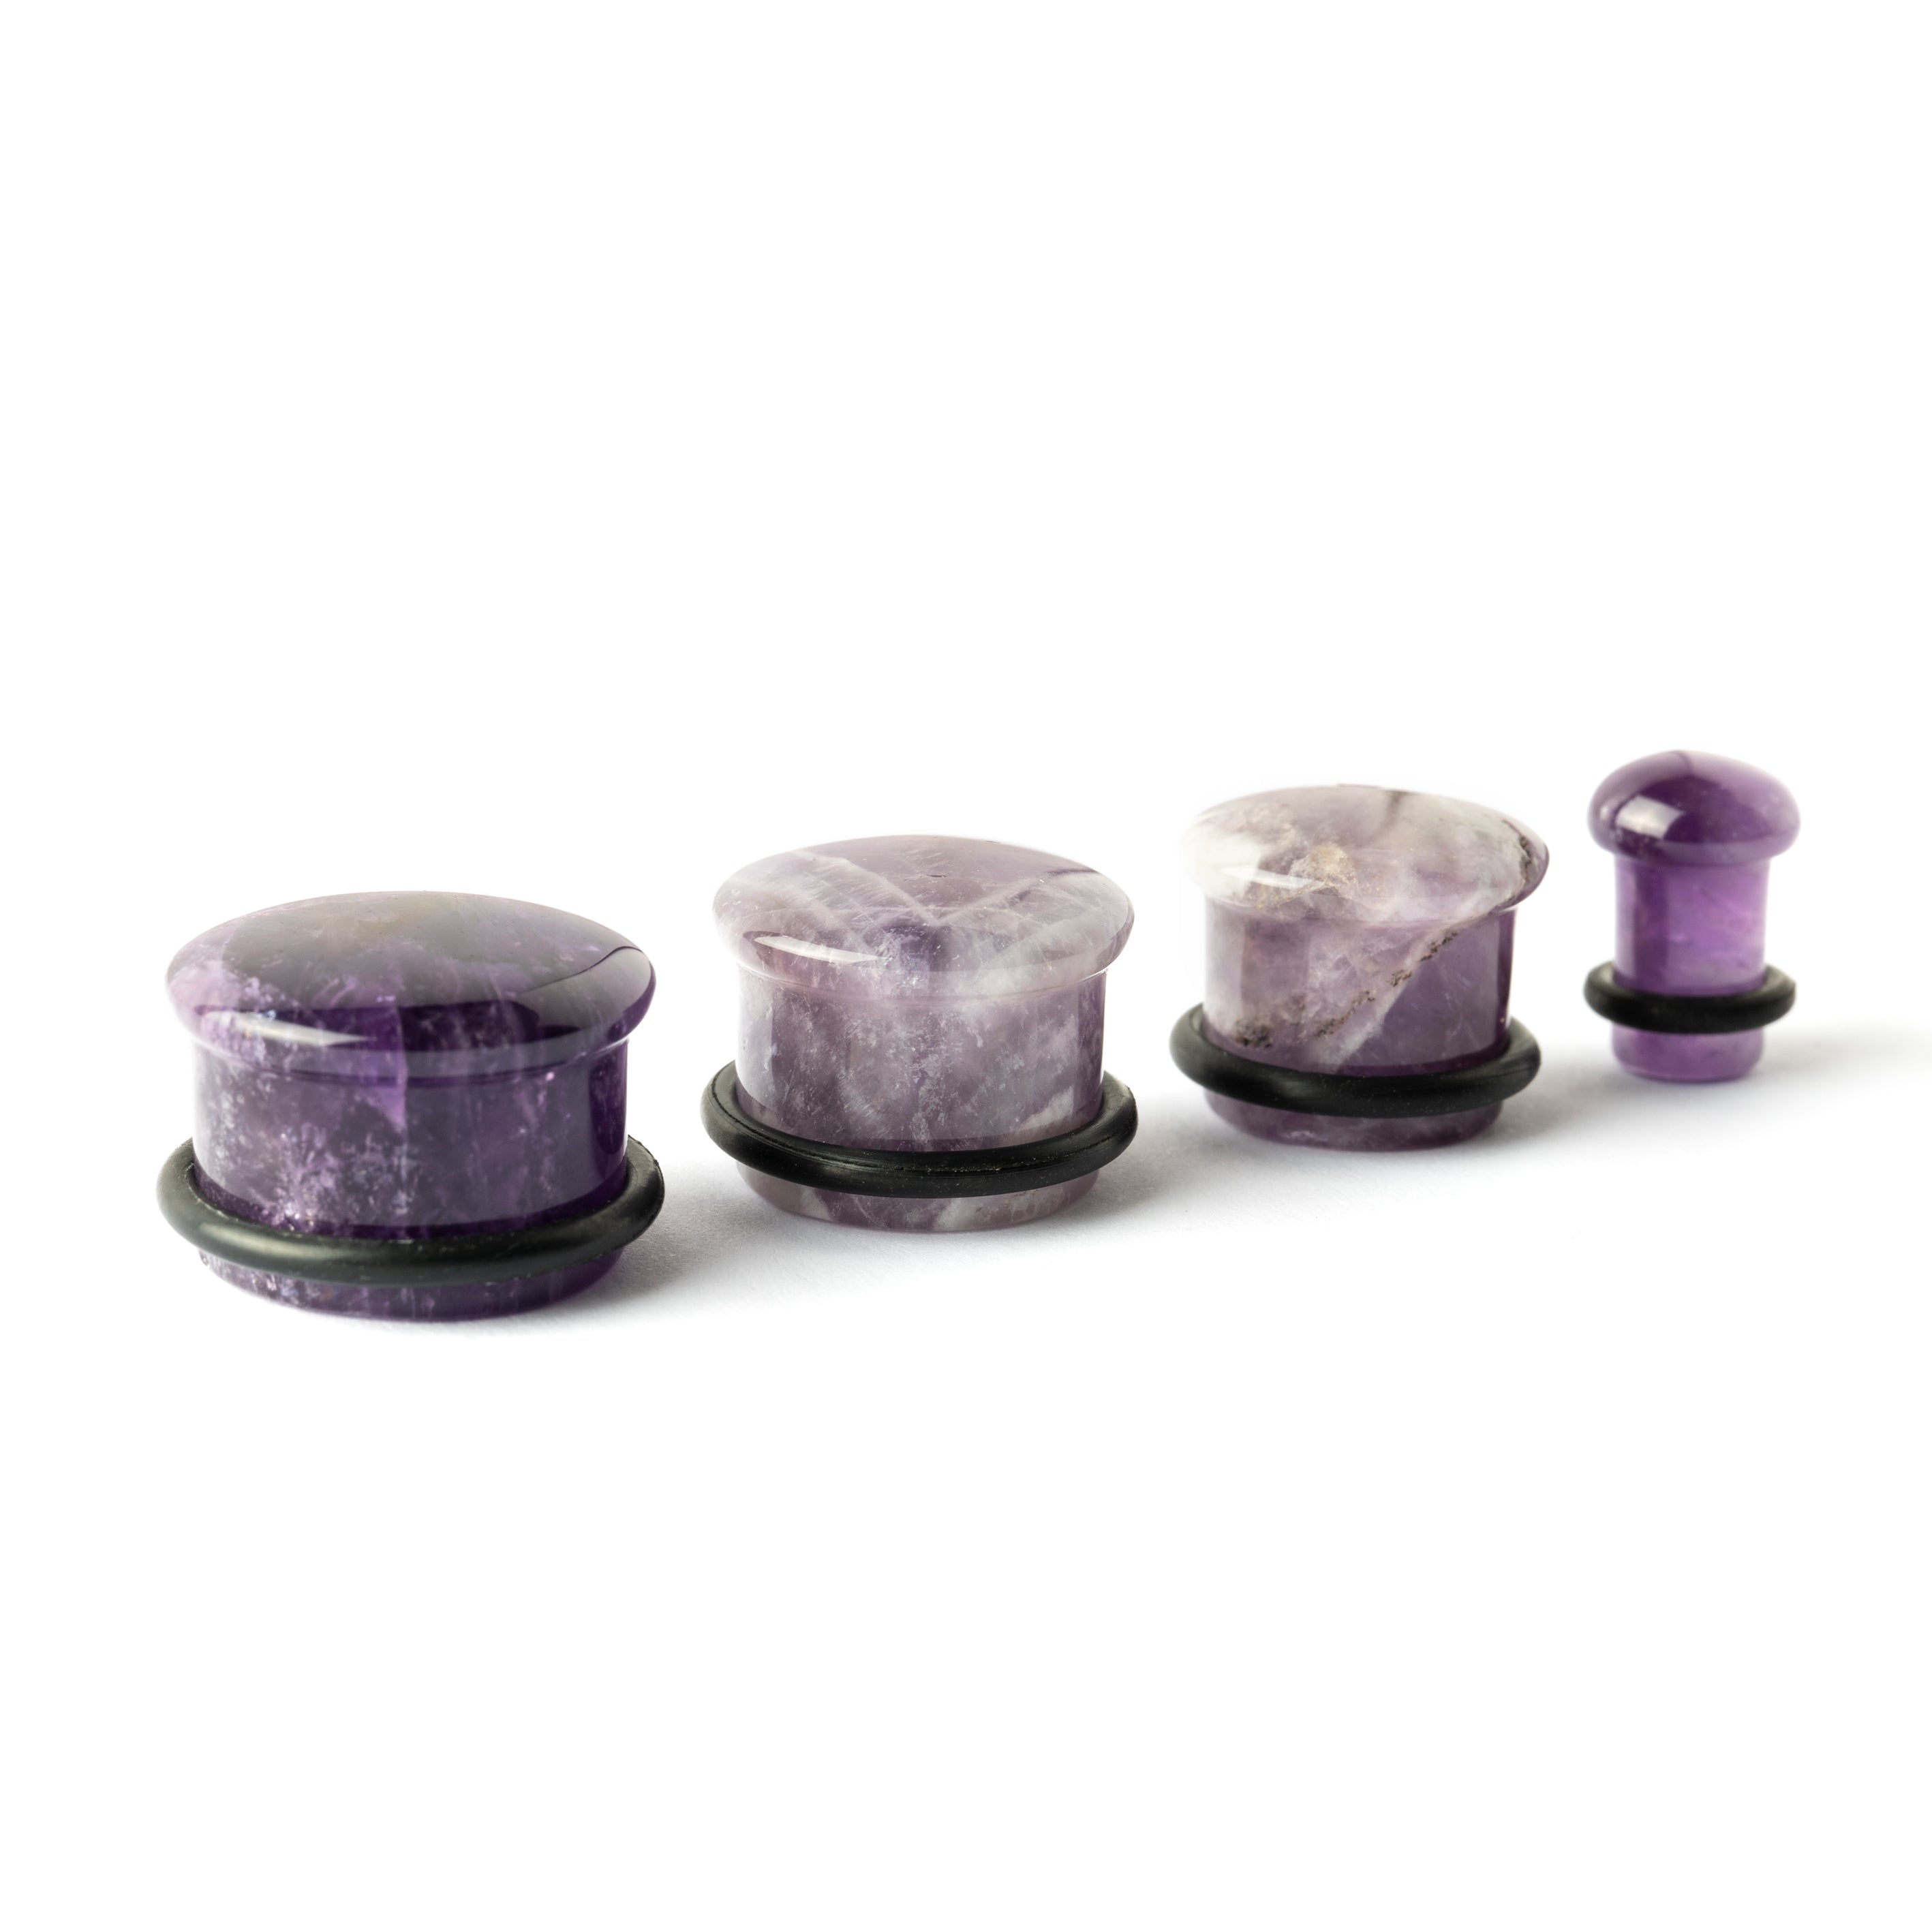 several sizes of Single Flare Amethyst stone ear plugs side view